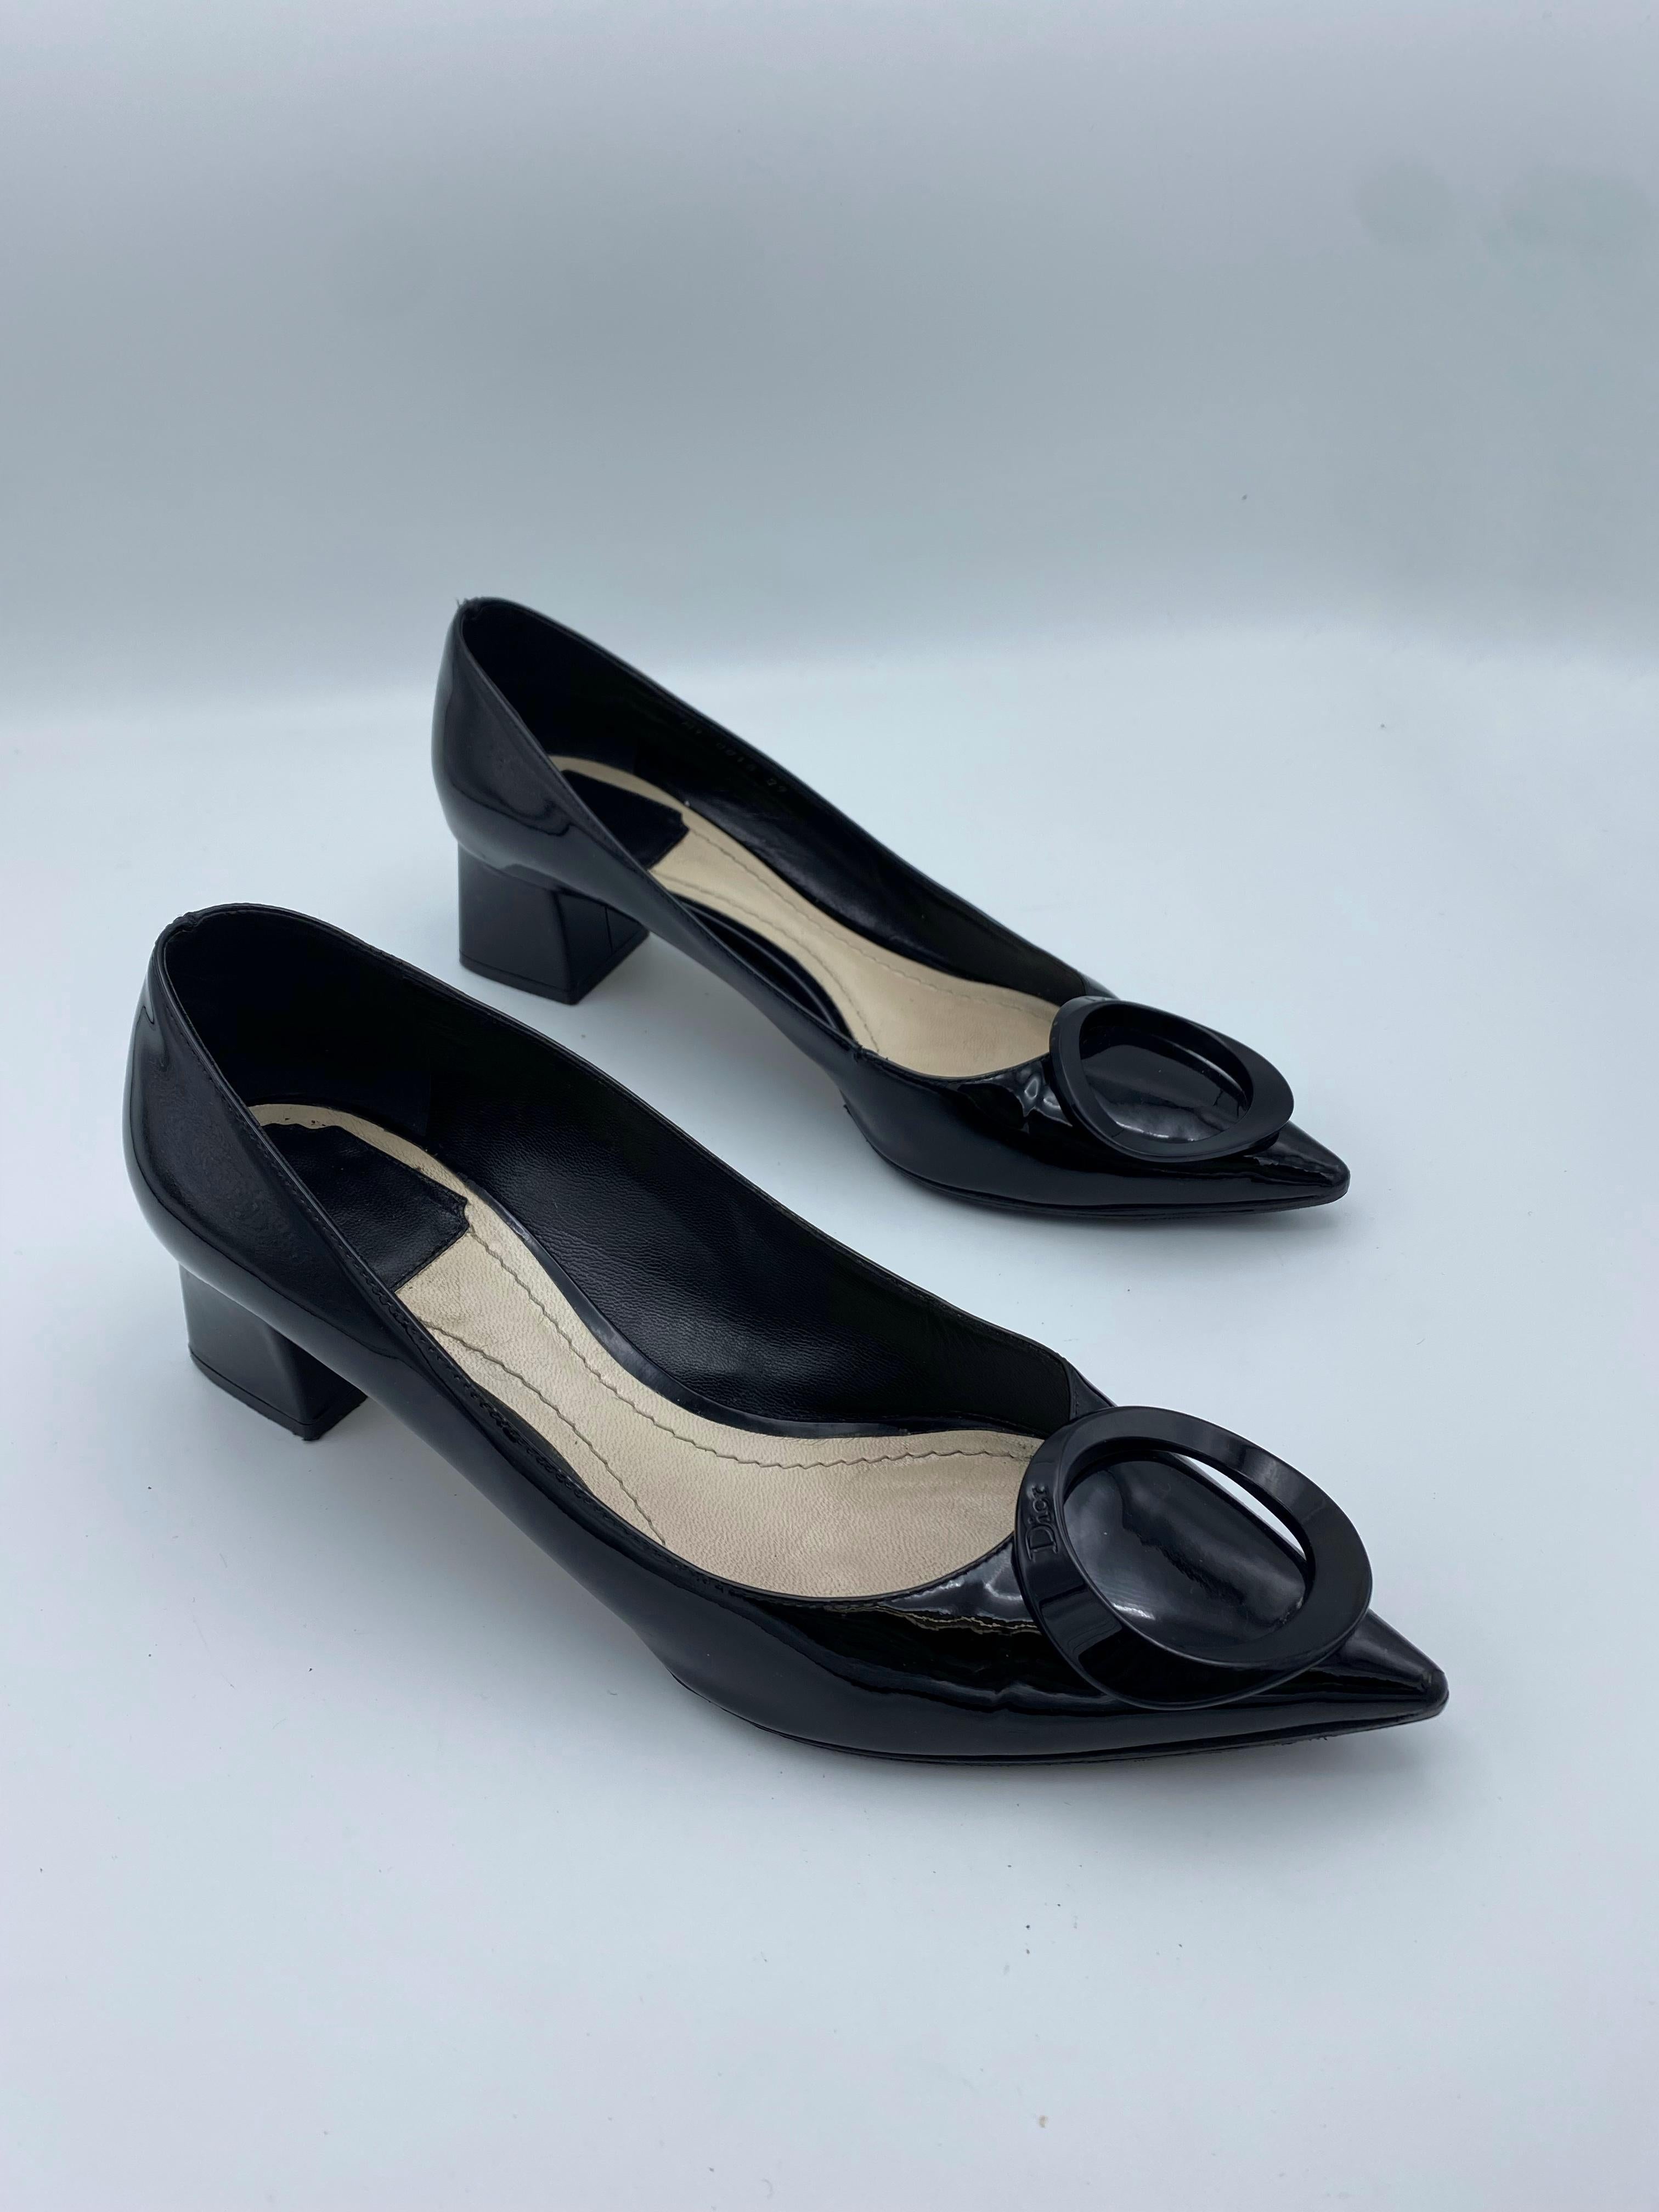 Product details:

The shoes made out of black patent leather, it features pointy toe and block low heel (2